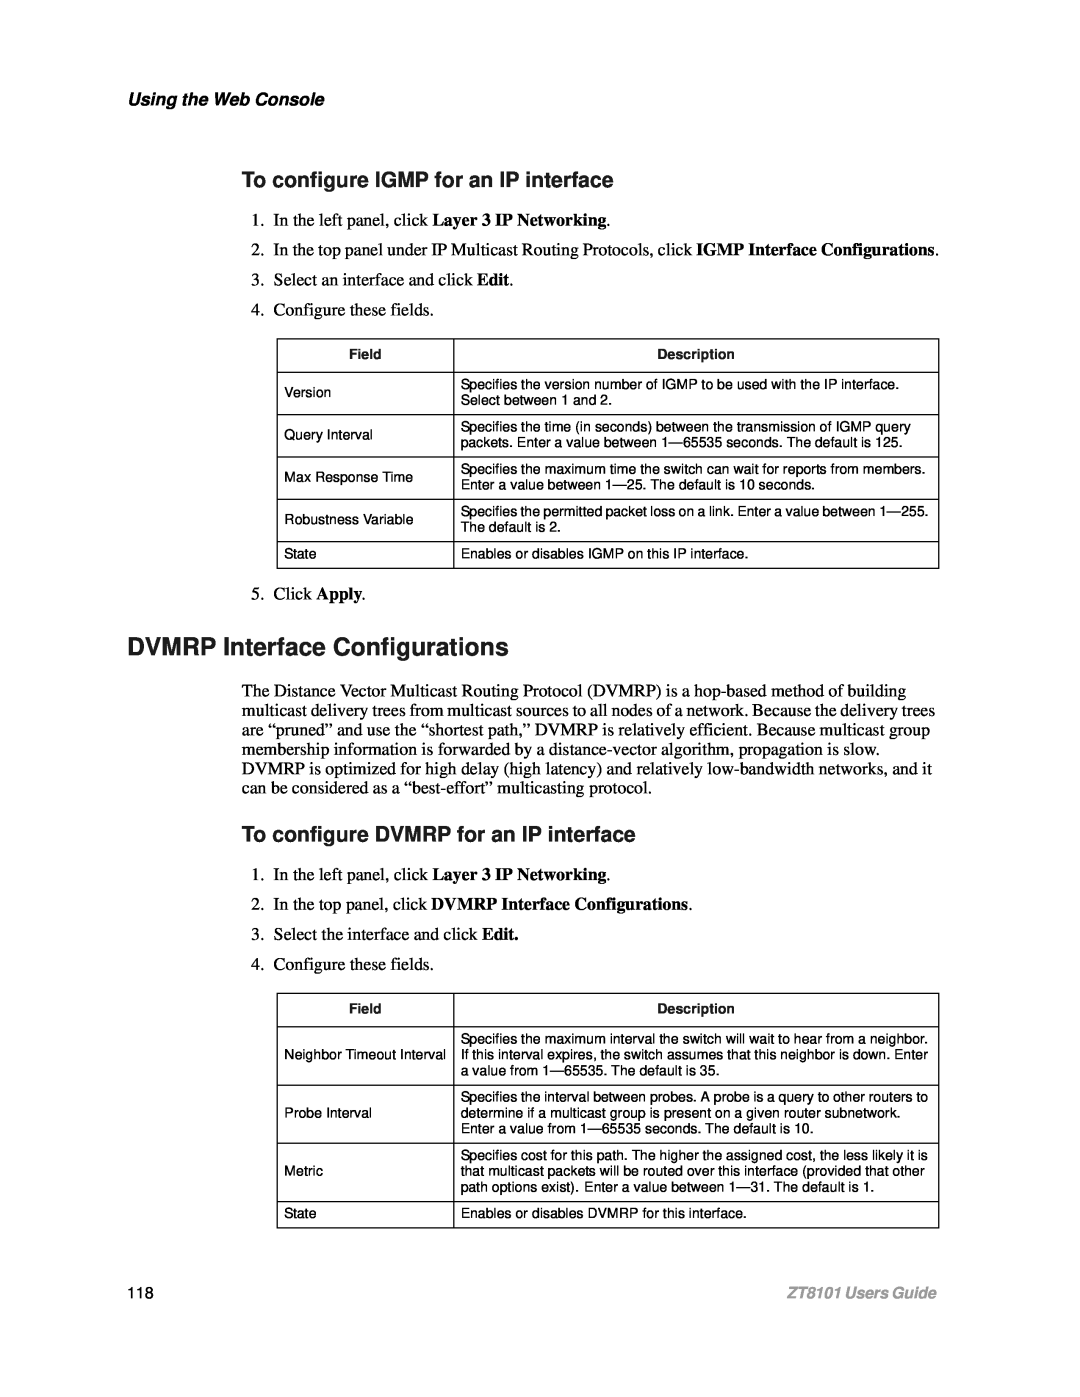 Intel ZT8101 DVMRP Interface Configurations, To configure IGMP for an IP interface, To configure DVMRP for an IP interface 